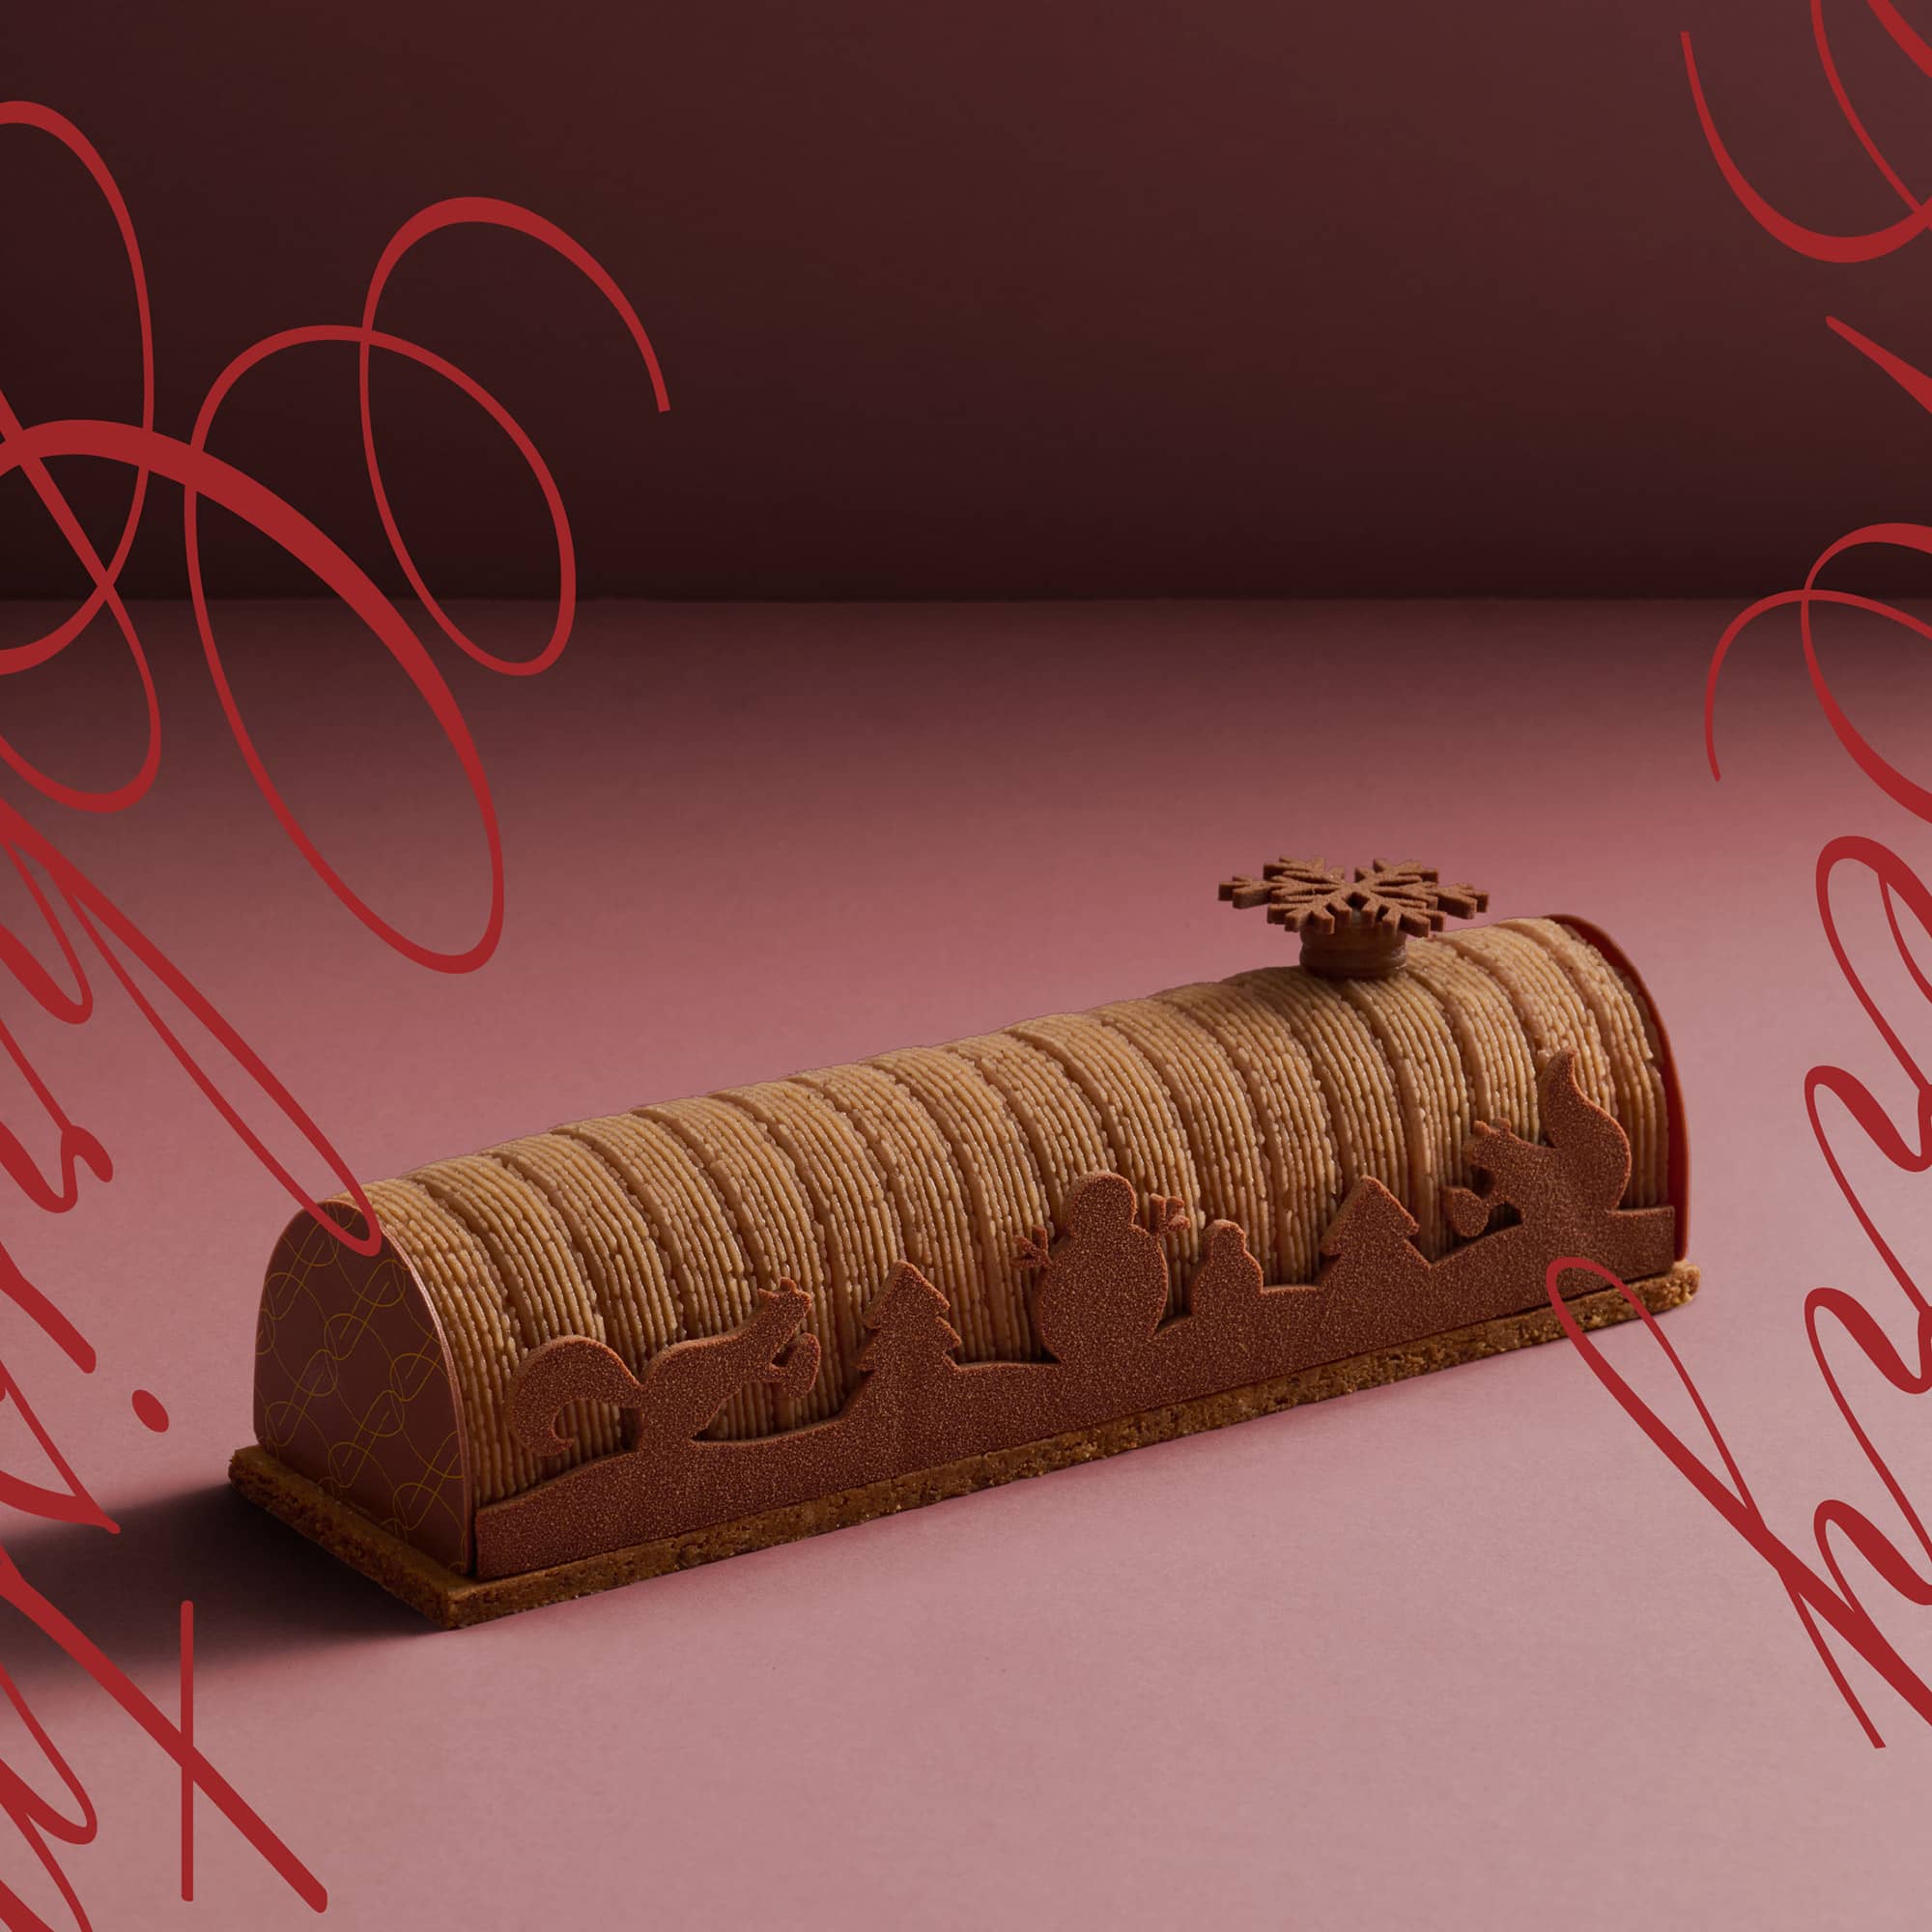 A 2023 Christmas log cake, the Chestnut Mont Blanc with Christmas themed chocolate decoration by the sides